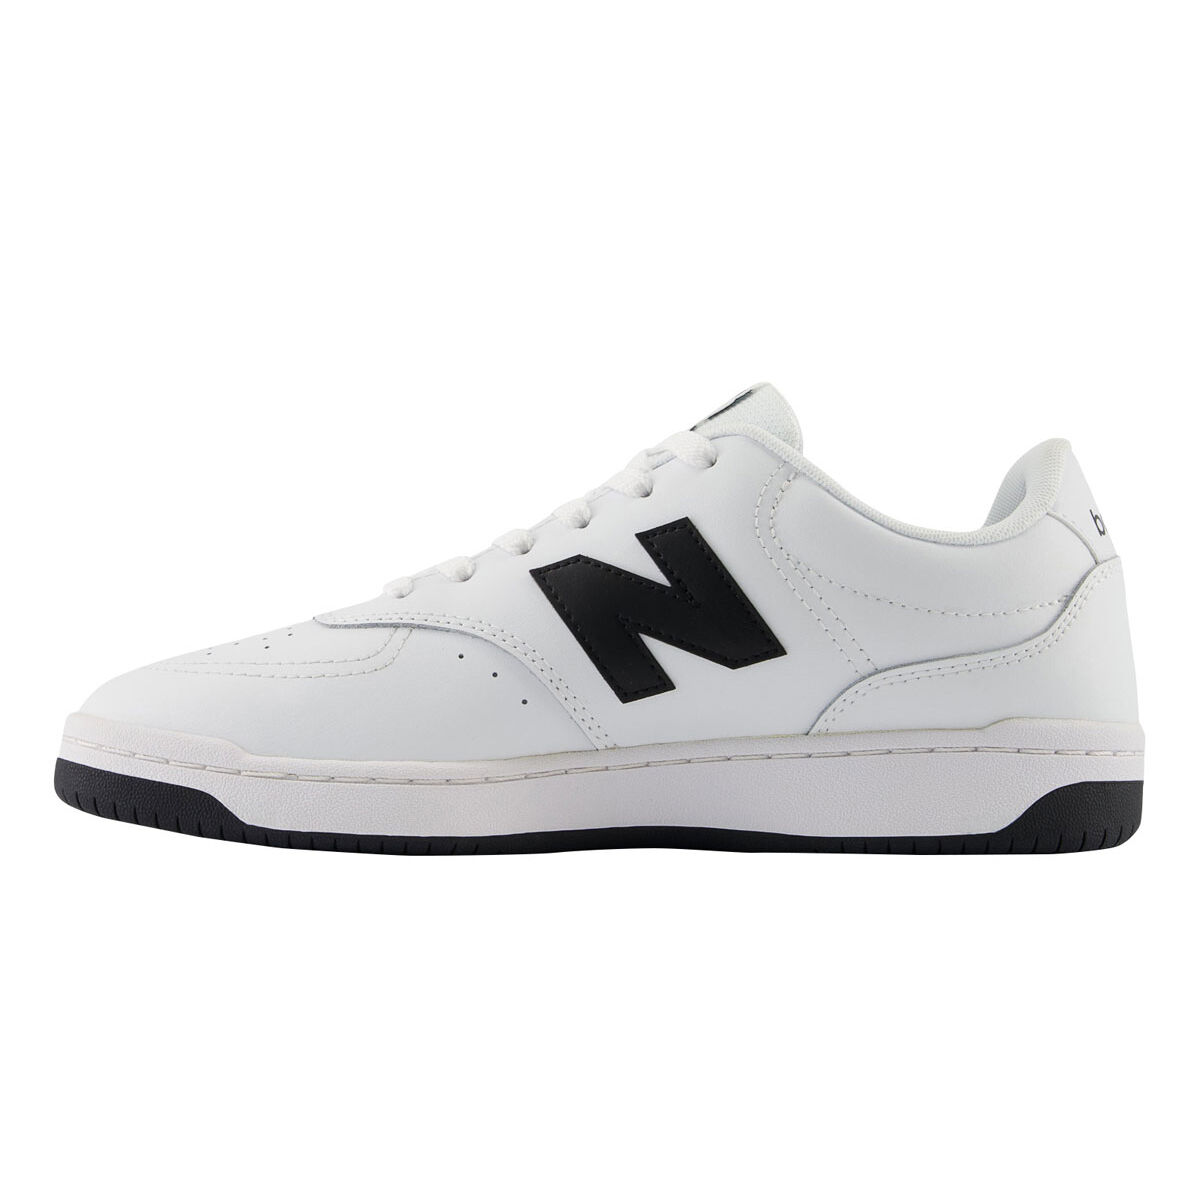 New Balance | Shoes, Clothing & Accessories | rebel